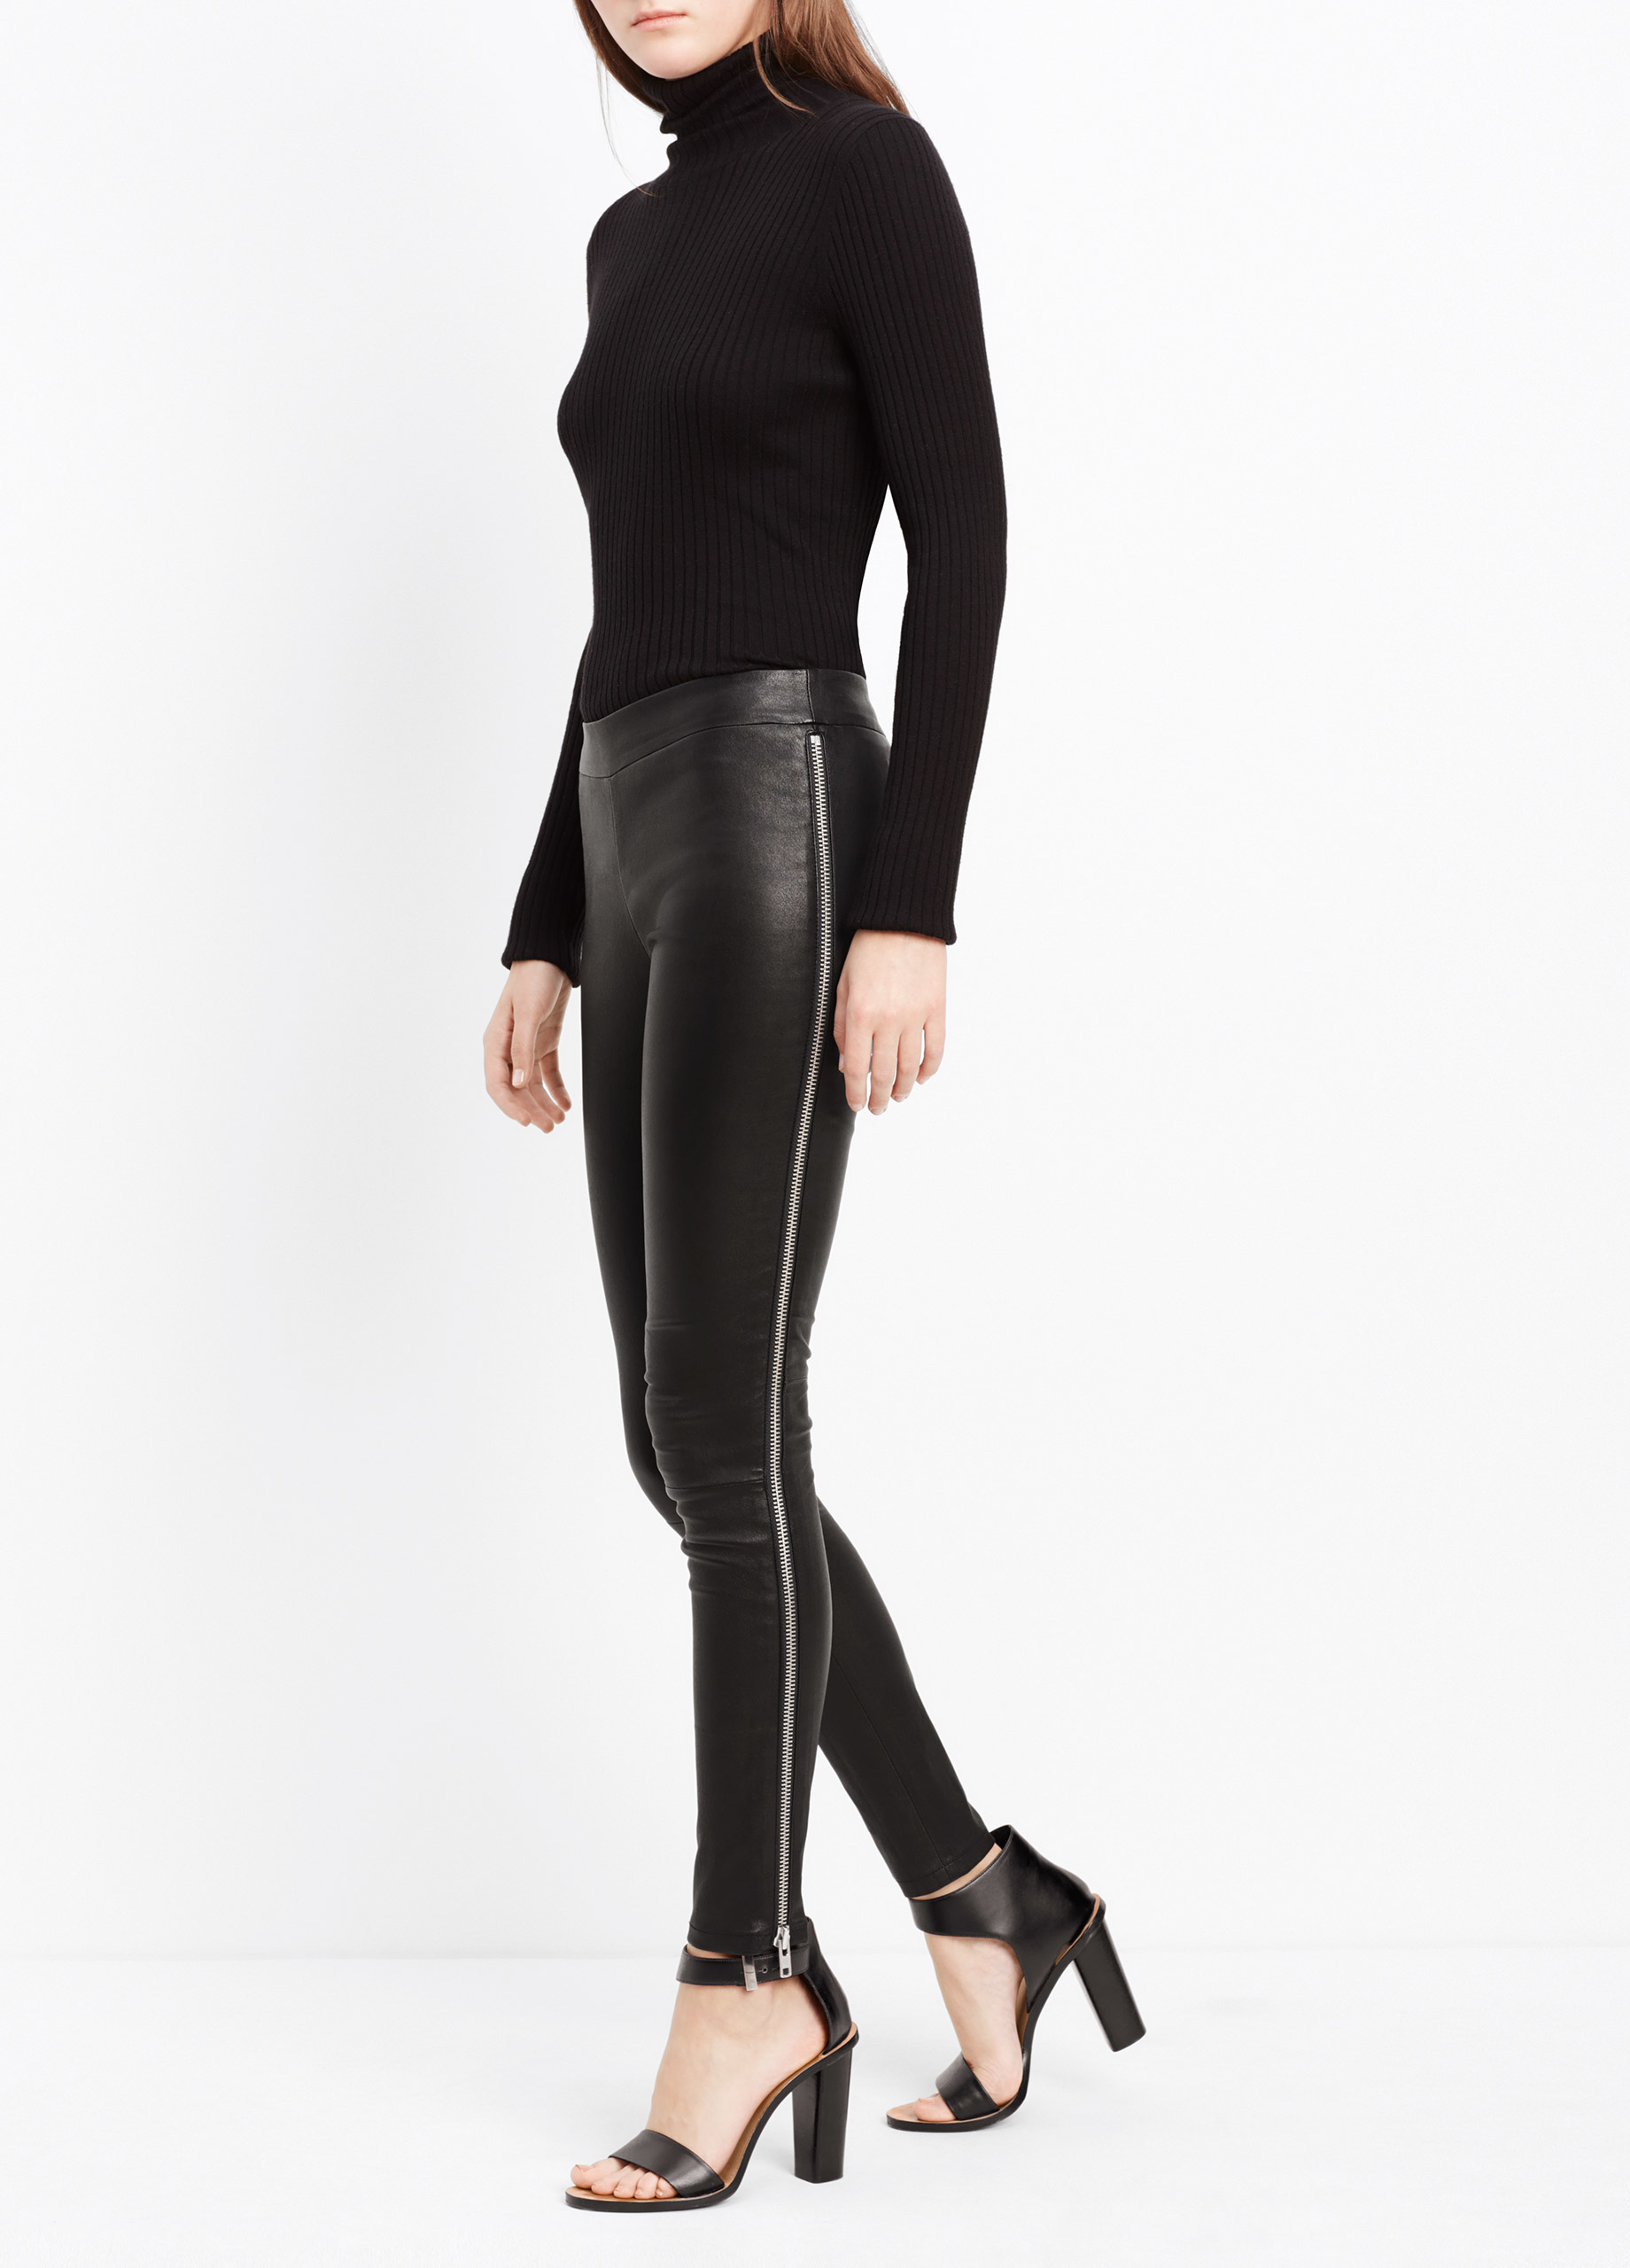 Lyst - Vince Leather Leggings With Side Zippers in Black